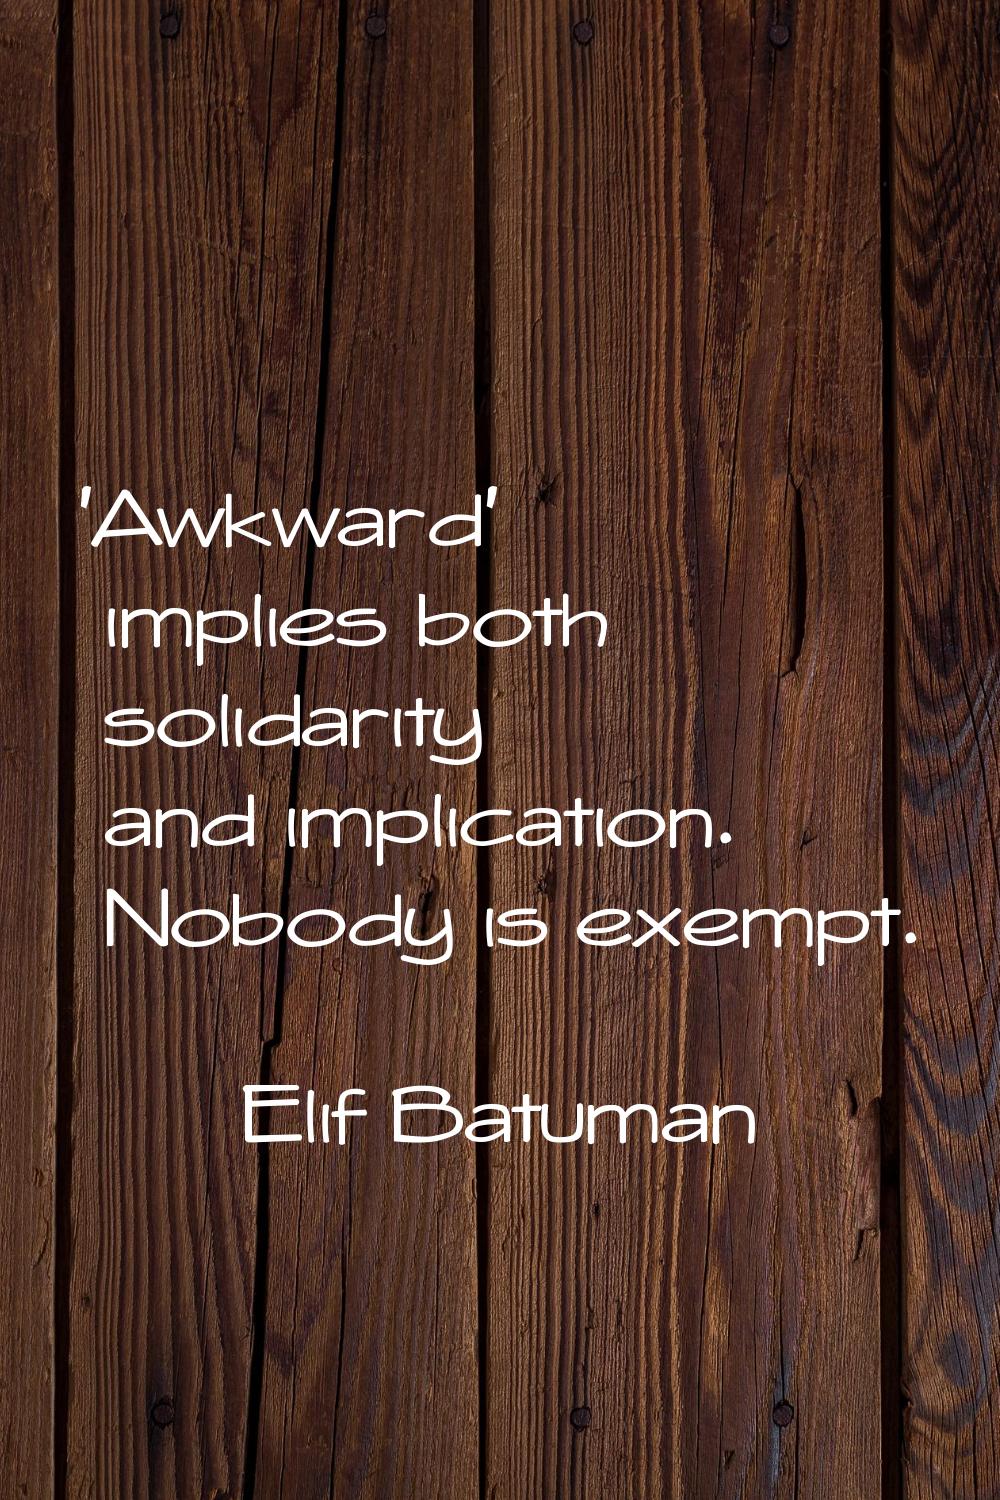 'Awkward' implies both solidarity and implication. Nobody is exempt.